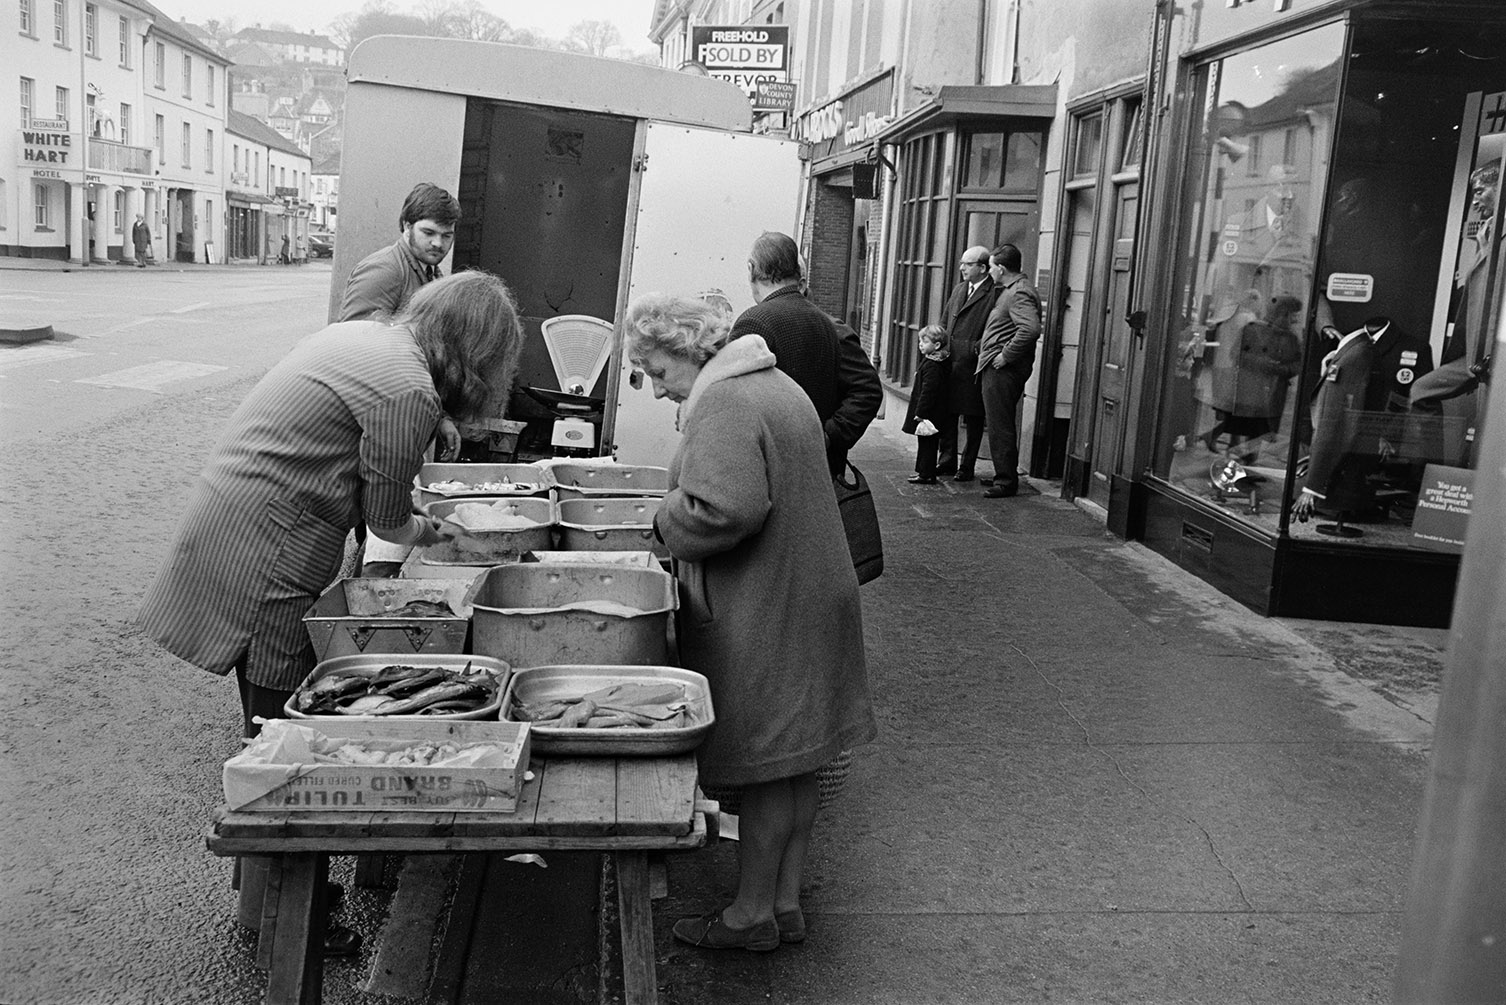 Market stalls in a street in Okehampton. A woman is buying from one of the traders who is running a fish stall. Two men and a child are stood outside a shop front in the background and the White Hart Hotel is visible on the opposite side of the street.